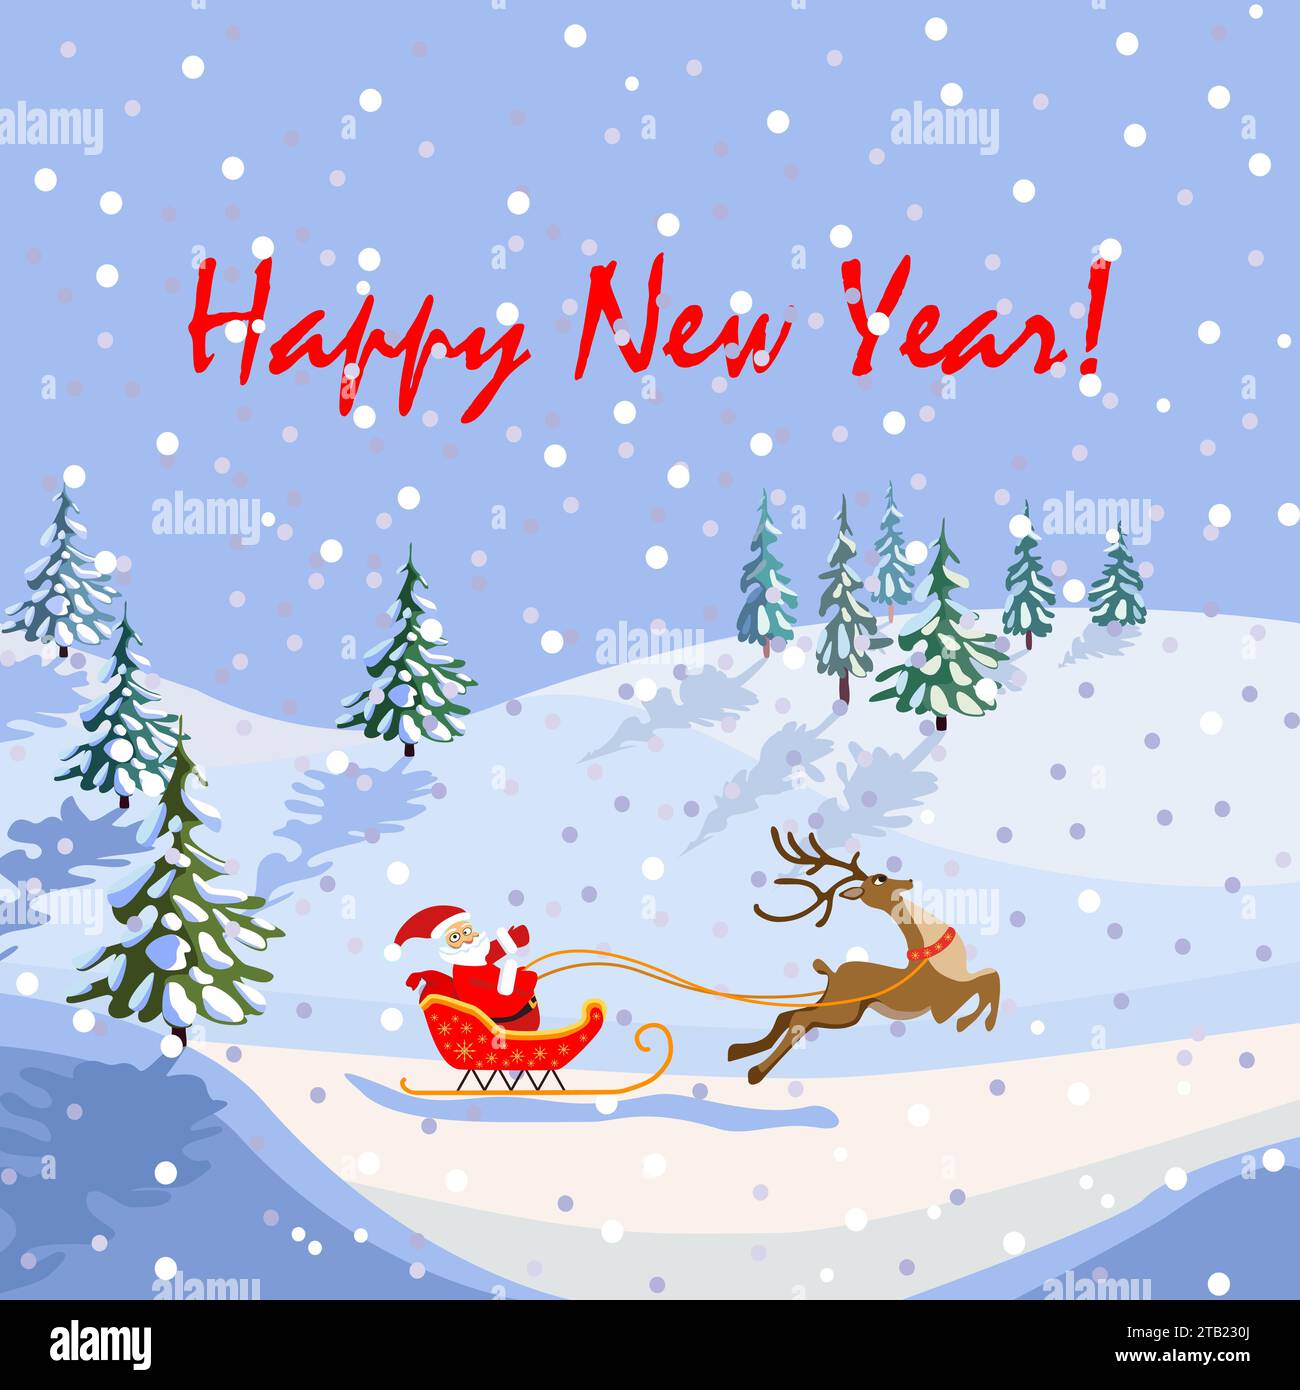 Happy New Year greeting card, santa on a sleigh with reindeer, Not AI, hand drawn Stock Vector